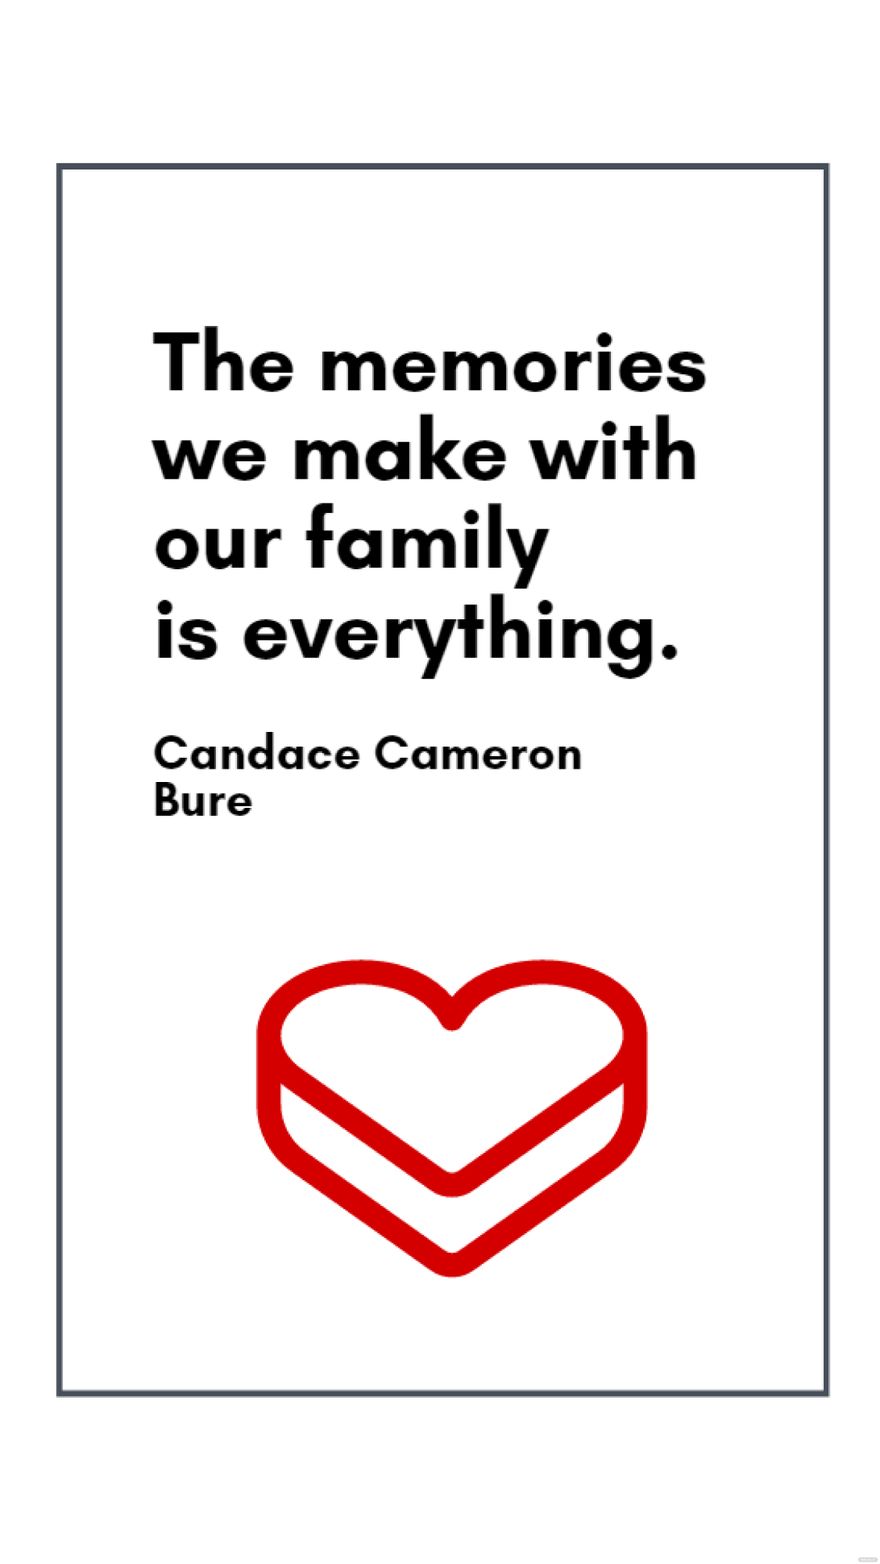 Free Candace Cameron Bure - The memories we make with our family is everything.